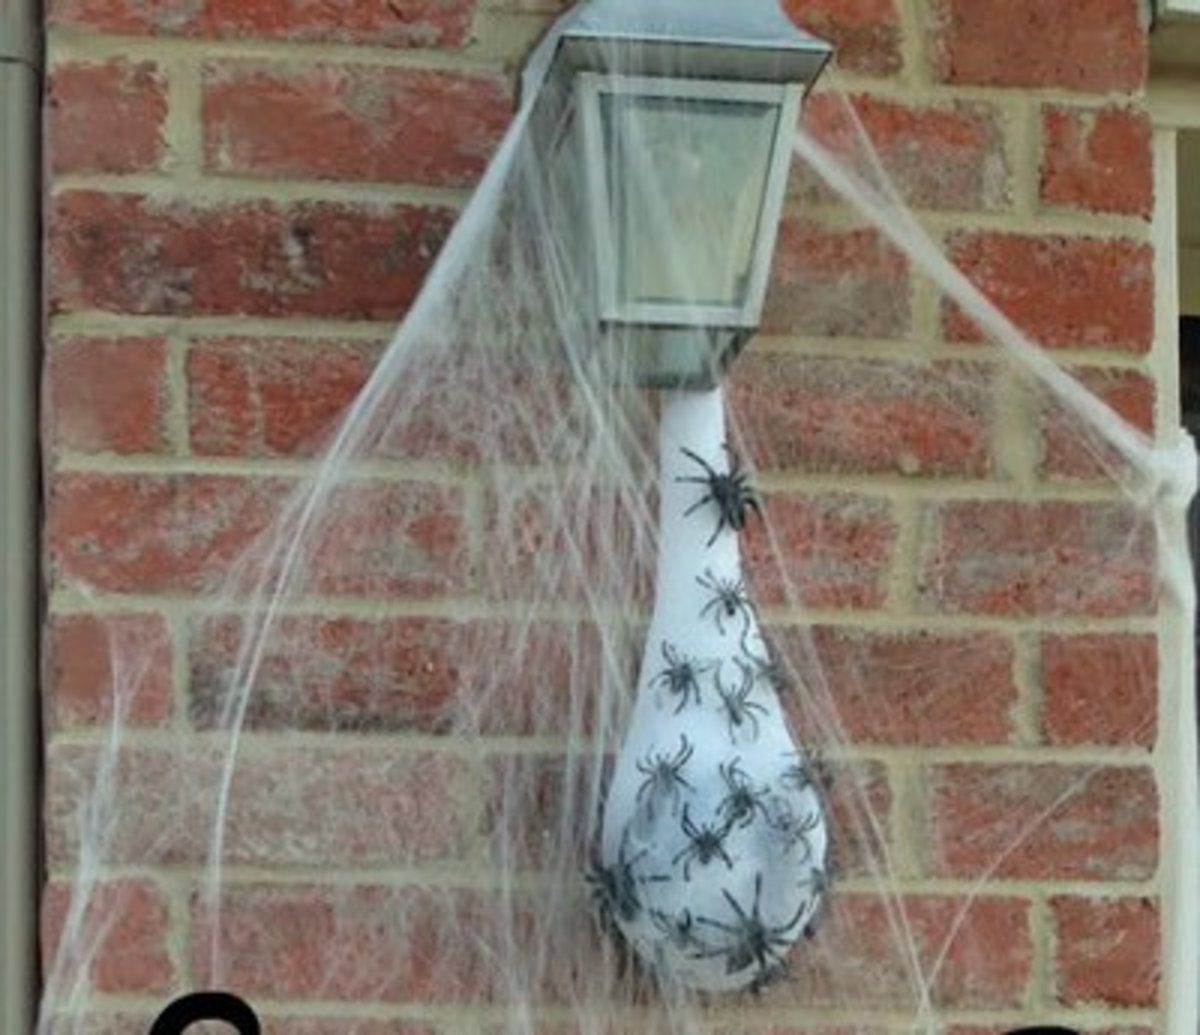 Yikes! Make your guests flinch with this alarmingly bulbous spider egg sac.